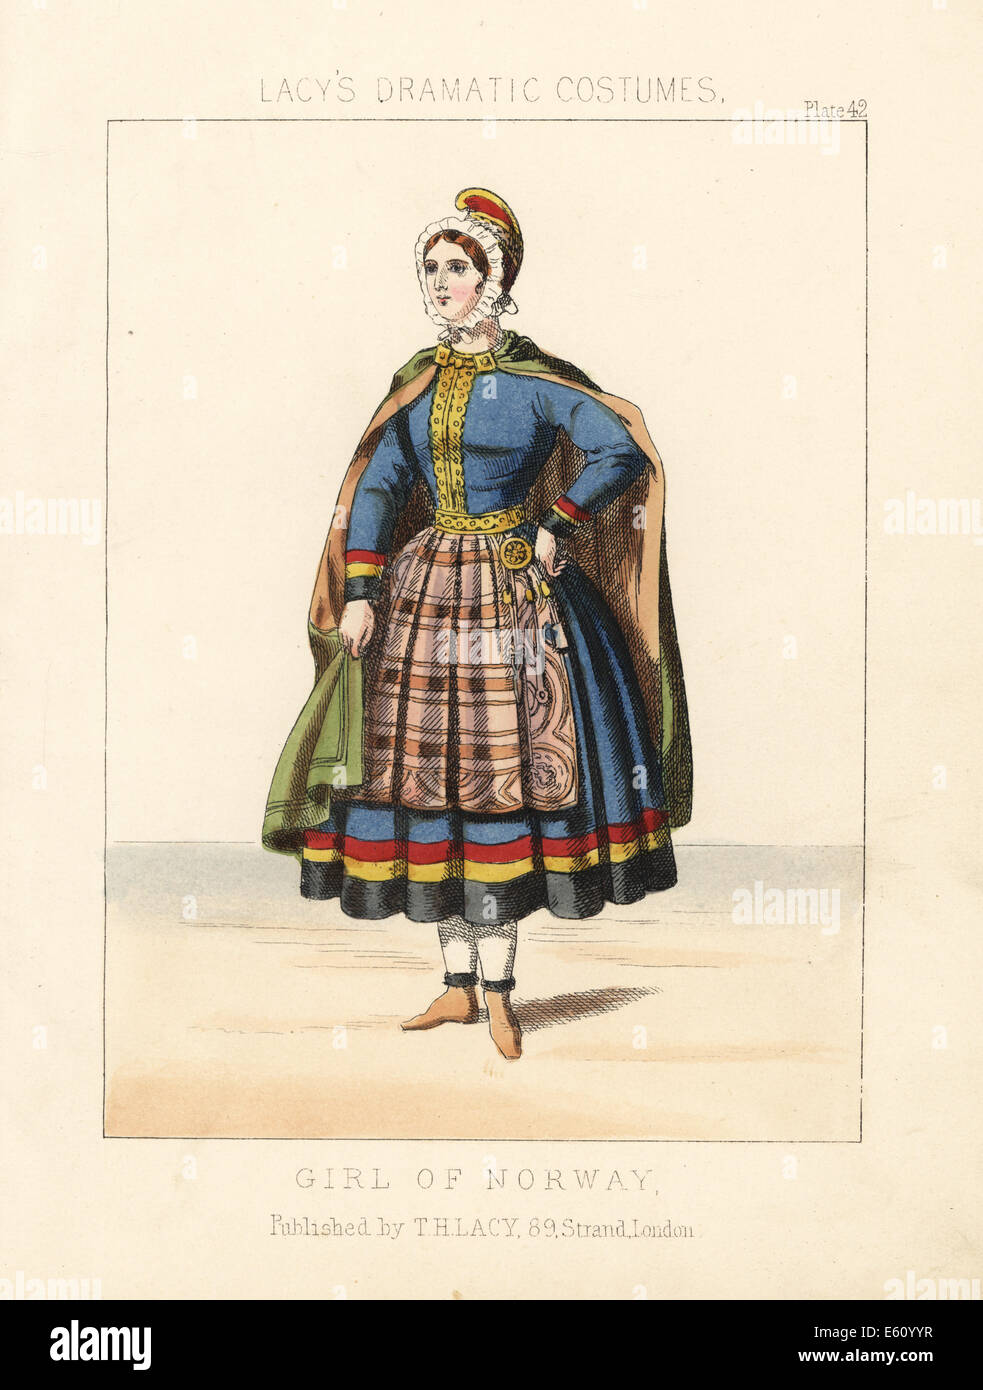 Costume of a girl of Norway, 19th century. Stock Photo